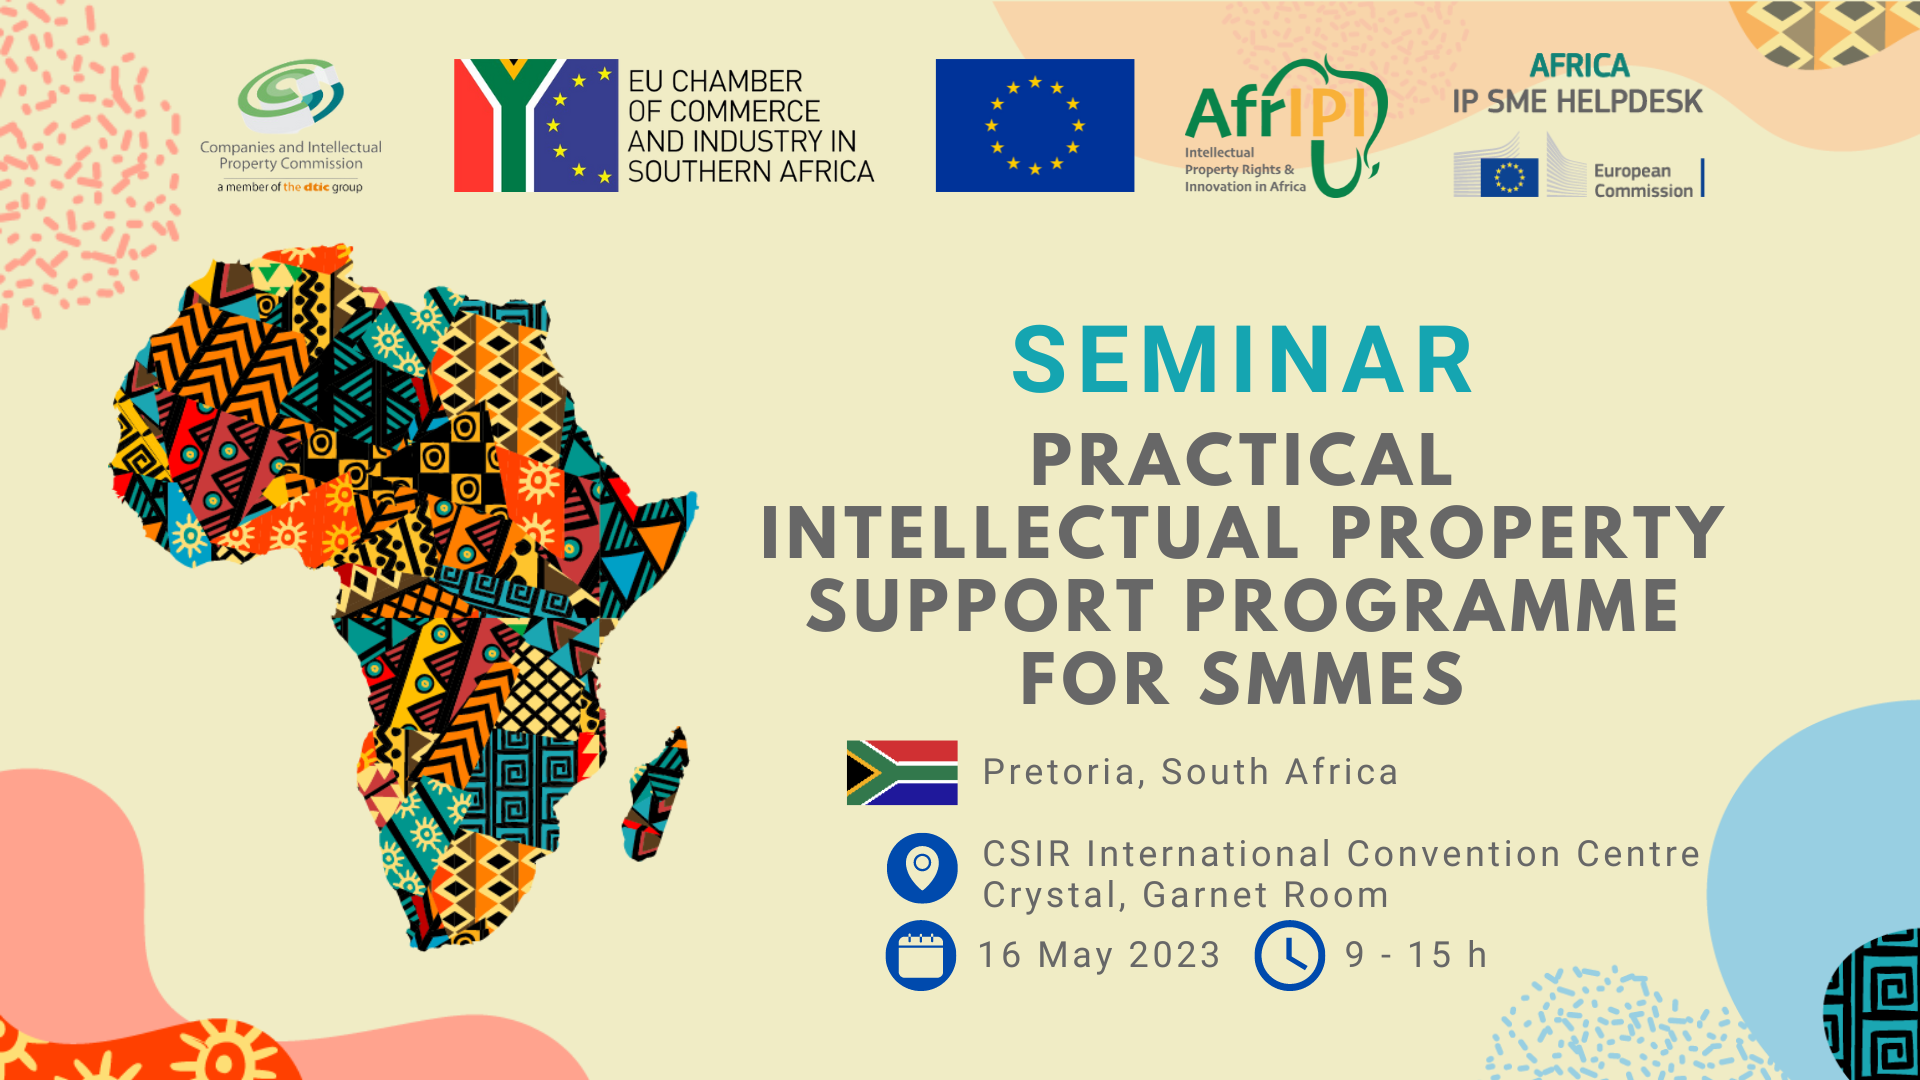 The practical intellectual property support programme for SMMEs